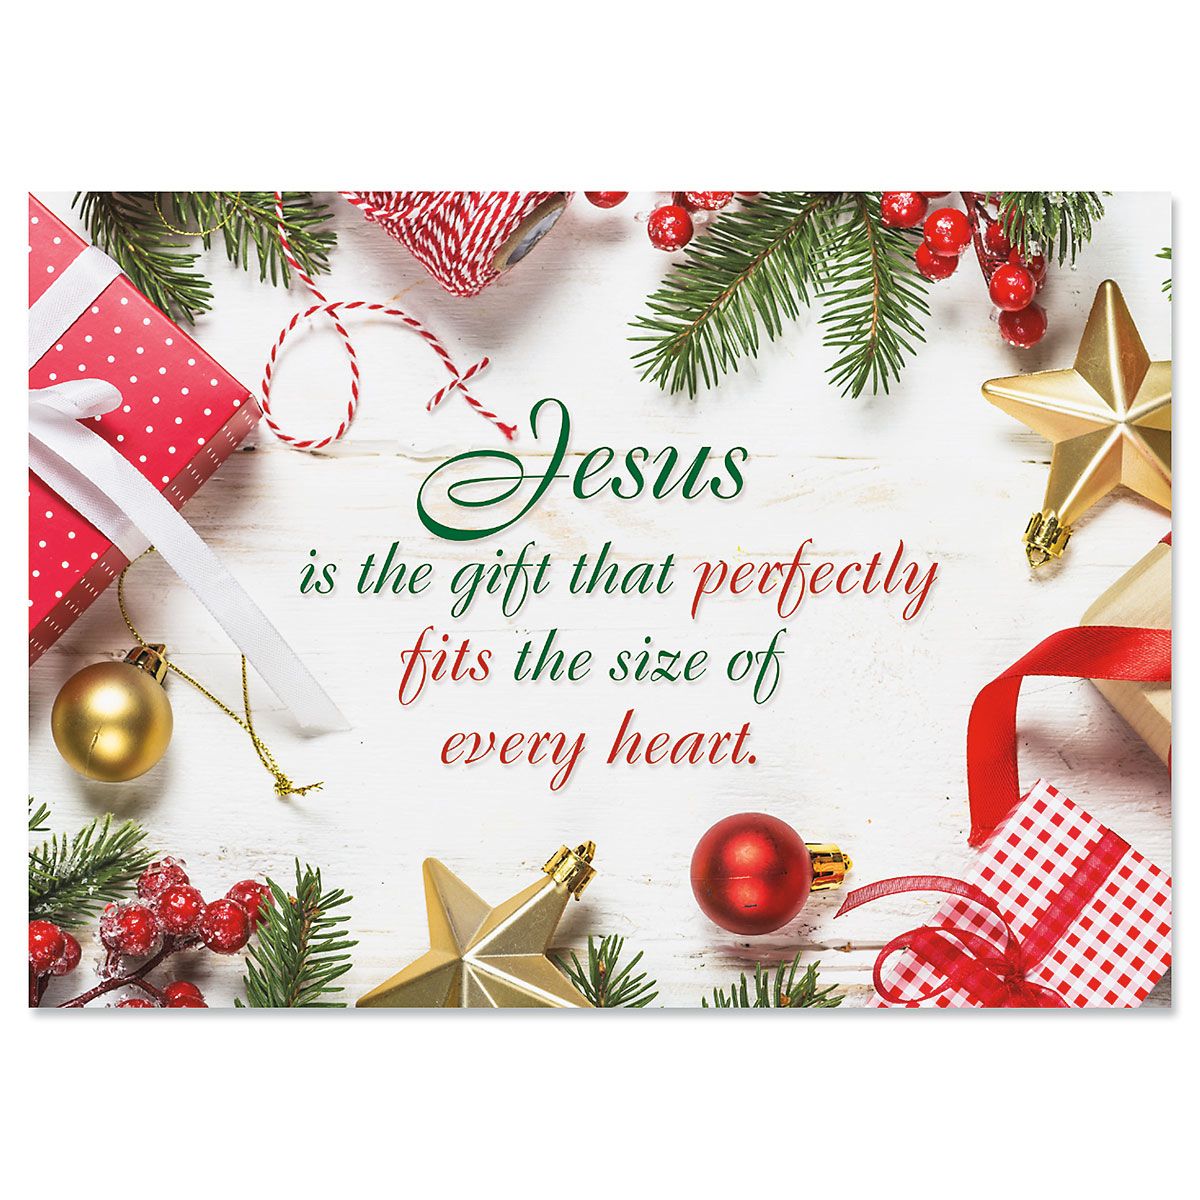 jesus-is-the-gift-religious-christmas-cards-current-catalog